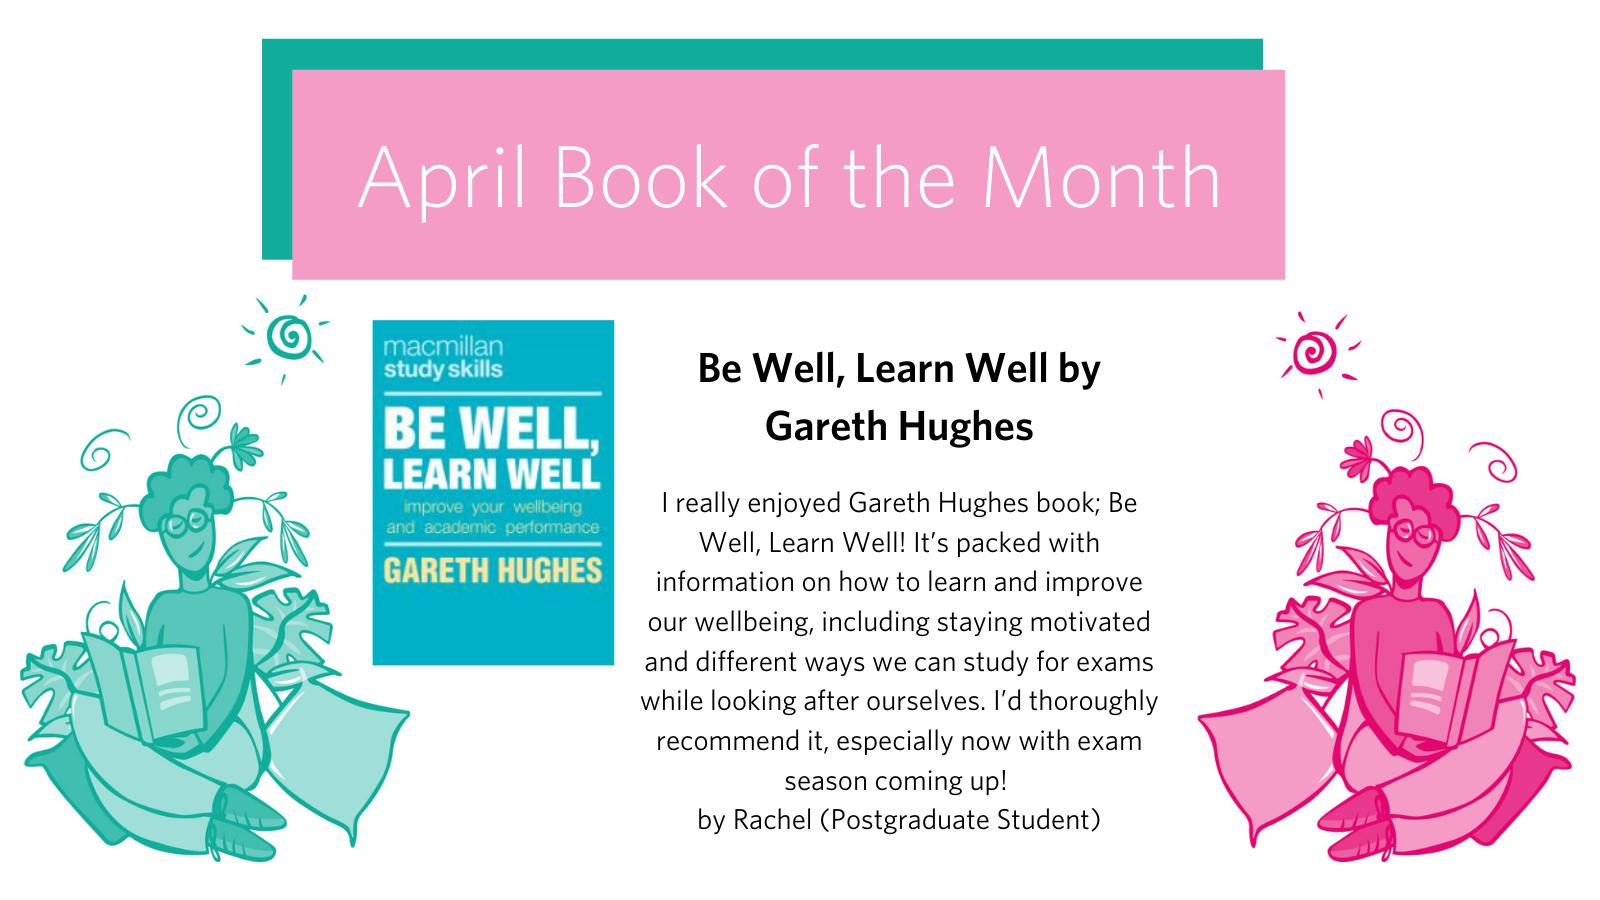 Be Well, Learn Well by Gareth Hughes: I really enjoyed Gareth Hughes book; Be Well, Learn Well! It’s packed with information on how to learn and improve our wellbeing, including staying motivated and different ways we can study for exams while looking after ourselves. I’d thoroughly recommend it, especially now with exam season coming up!